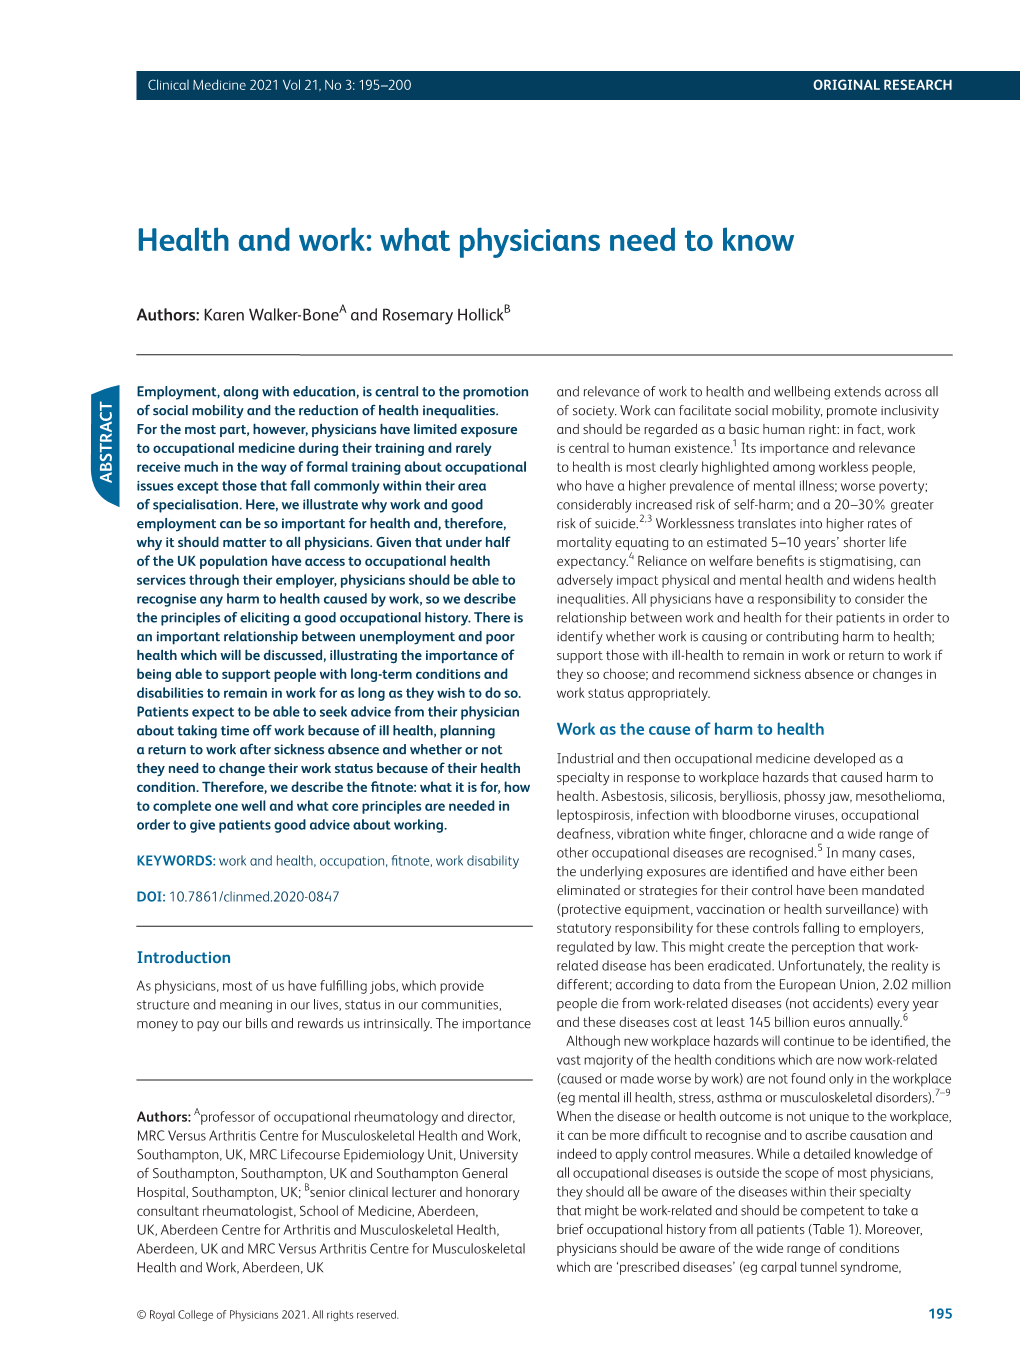 Health and Work: What Physicians Need to Know